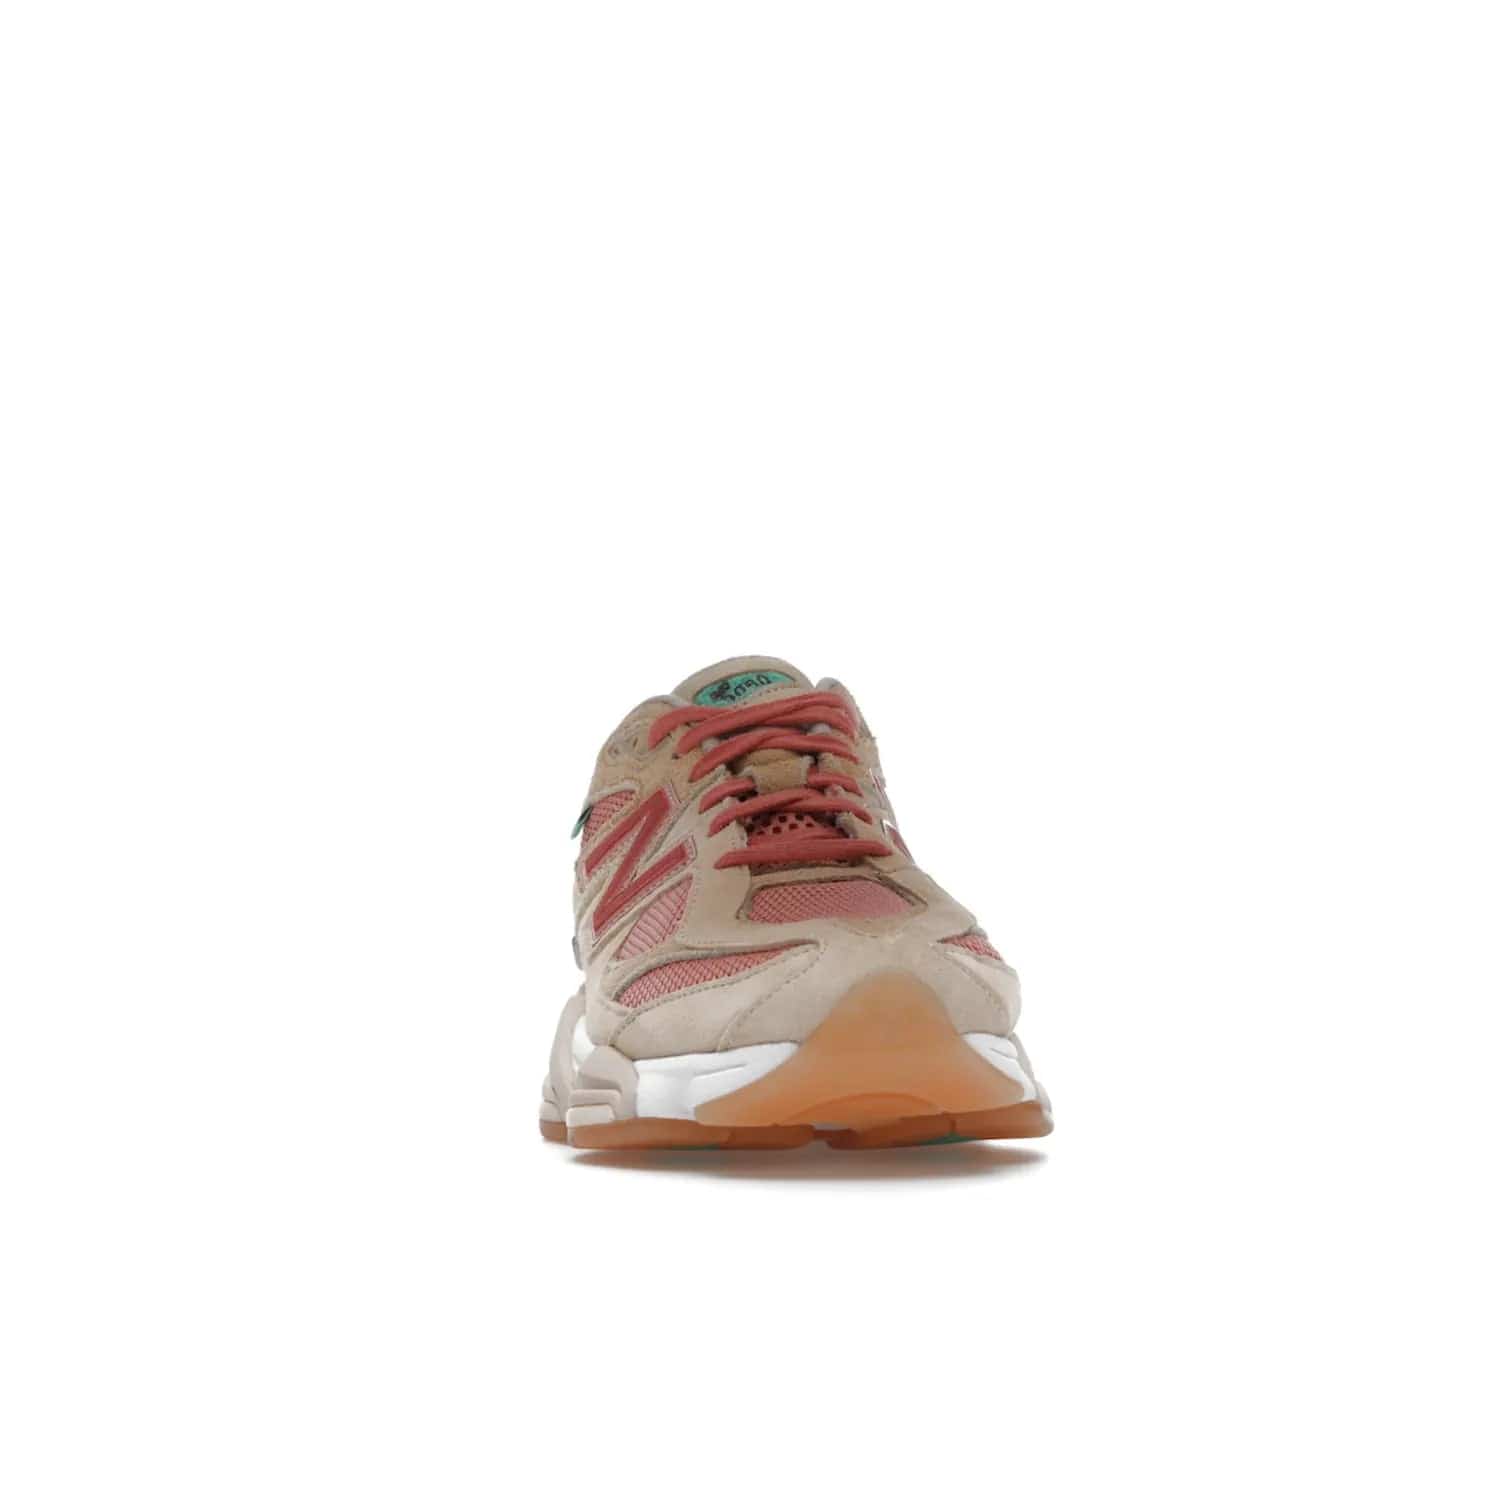 New Balance 9060 Joe Freshgoods Inside Voices Penny Cookie Pink - Image 9 - Only at www.BallersClubKickz.com - Introducing the New Balance 9060 Joe Freshgoods Inside Voices Cookie Pink. A stylish and comfortable sneaker featuring an ivory cream and blossom mesh construction, light brown suede overlays, New Balance logos, and "Inside Voices" embroidery. A white, green and beige sculptural sole finishes the look.